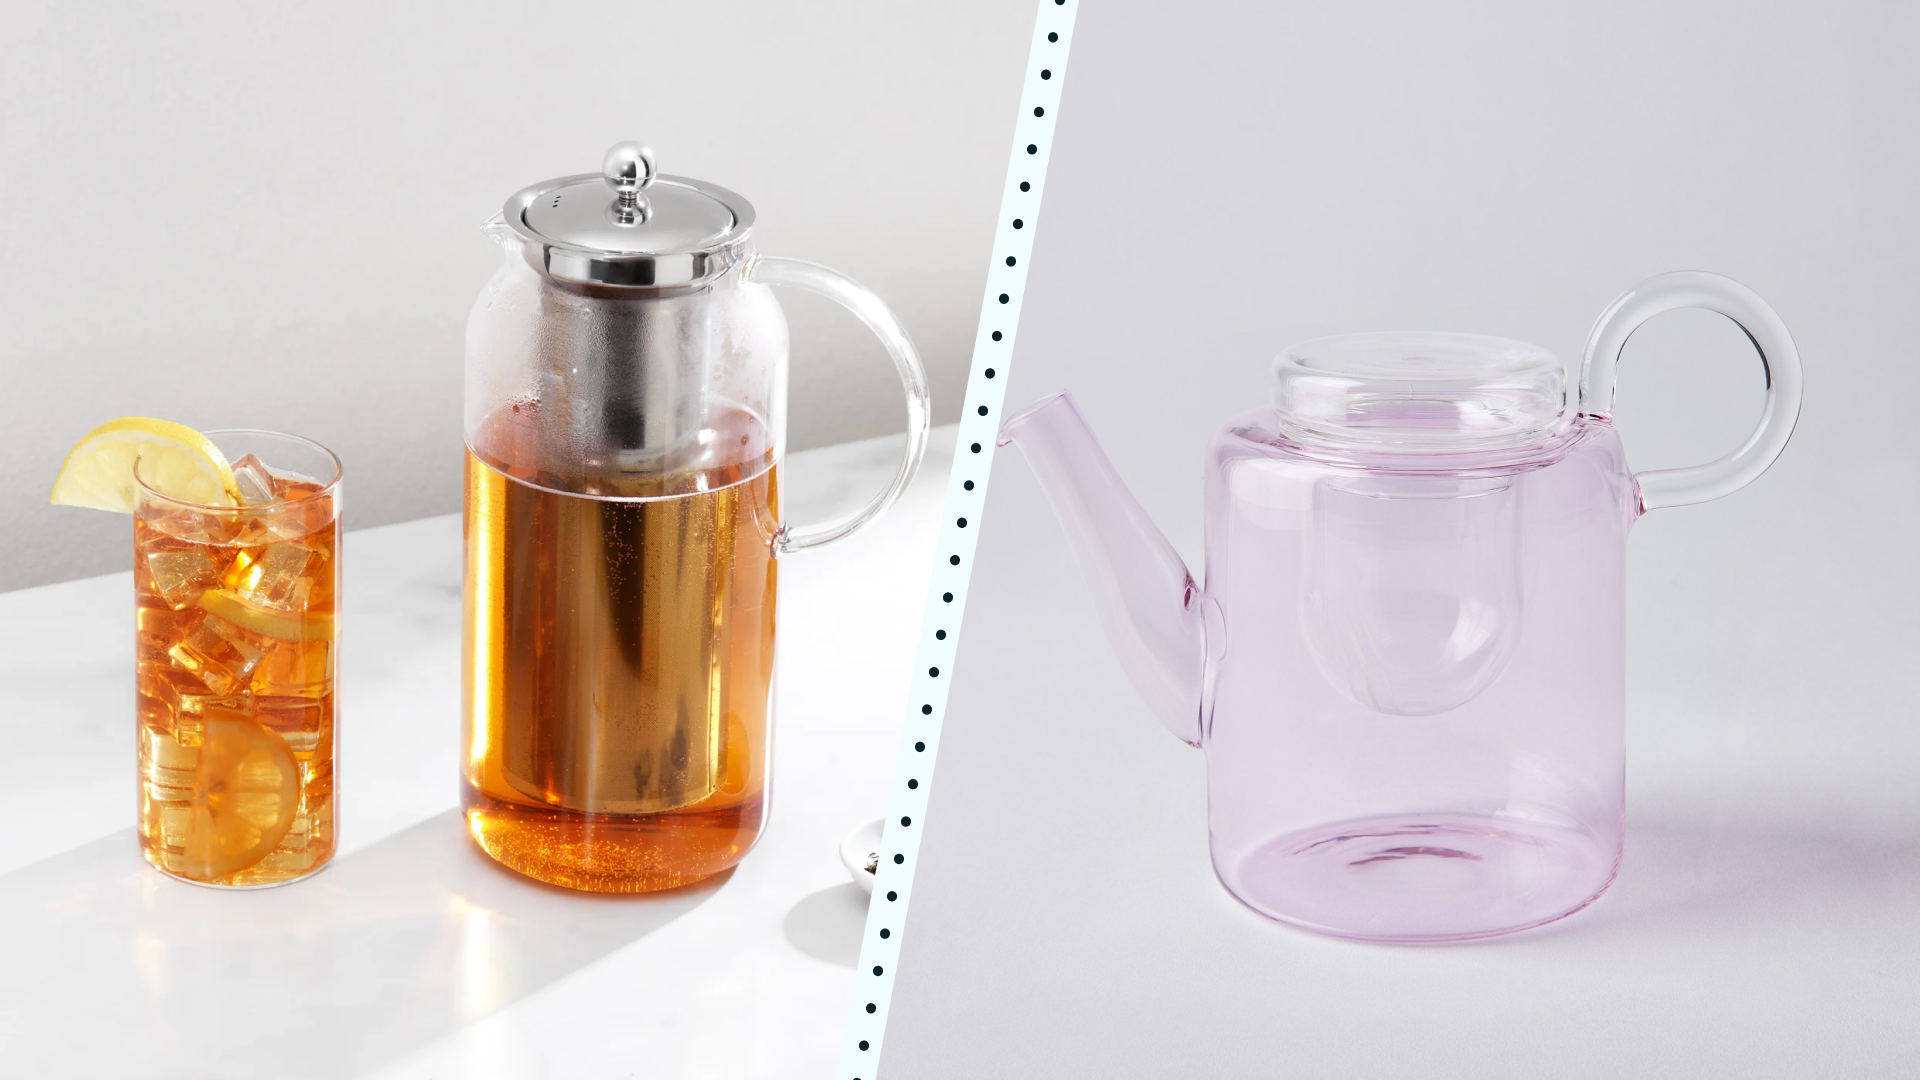 The Country Jasmine Covered Pitcher is perfect for serving water